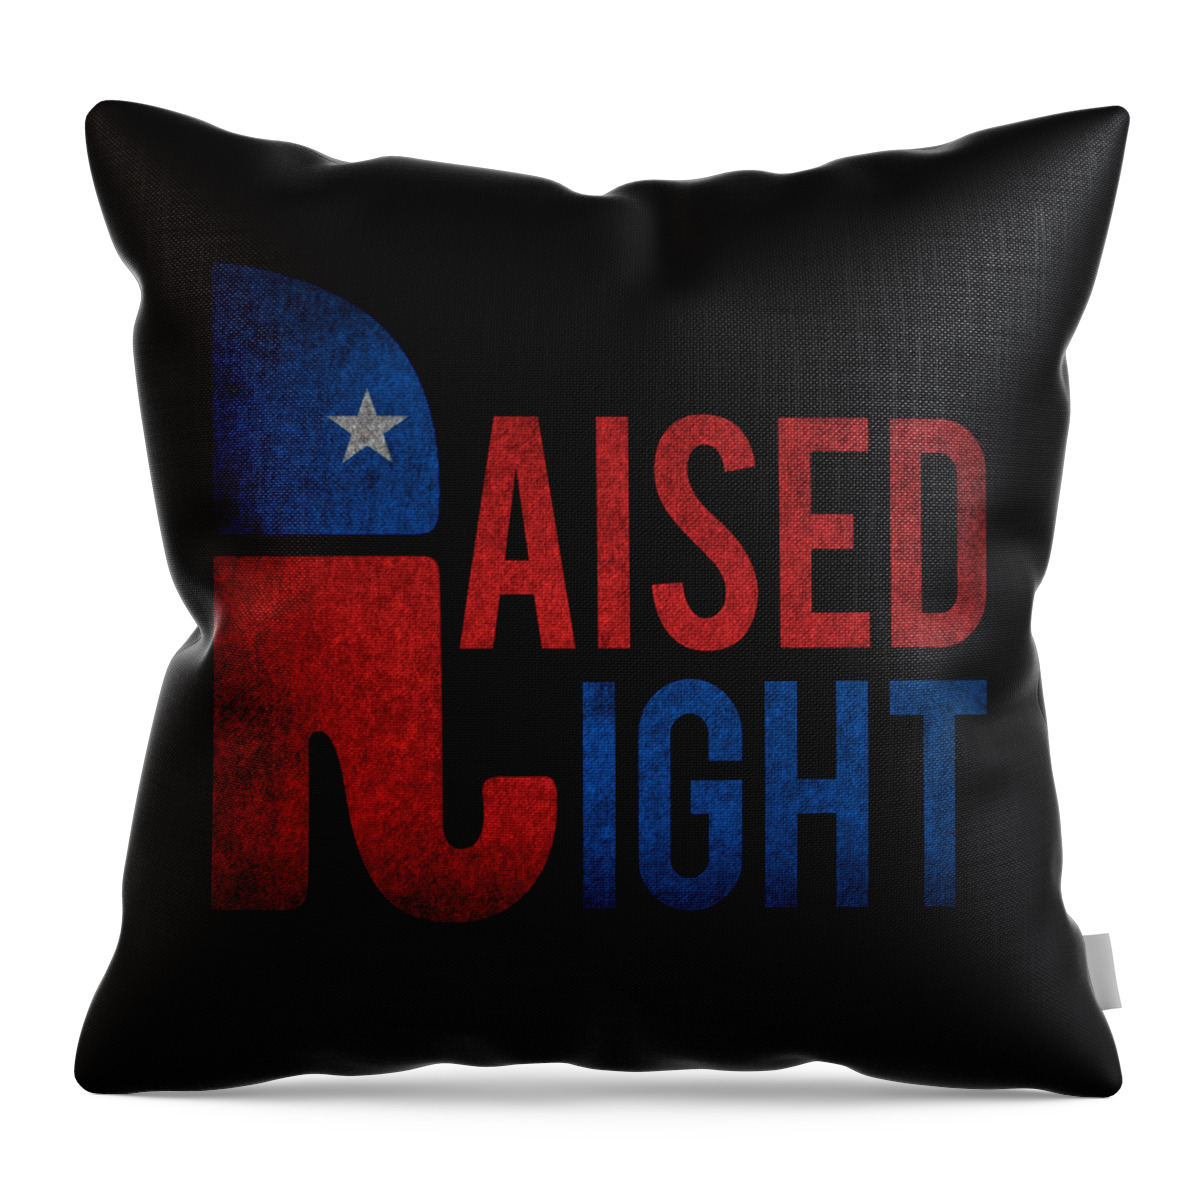 Cool Throw Pillow featuring the digital art Raised Right Retro Republican by Flippin Sweet Gear